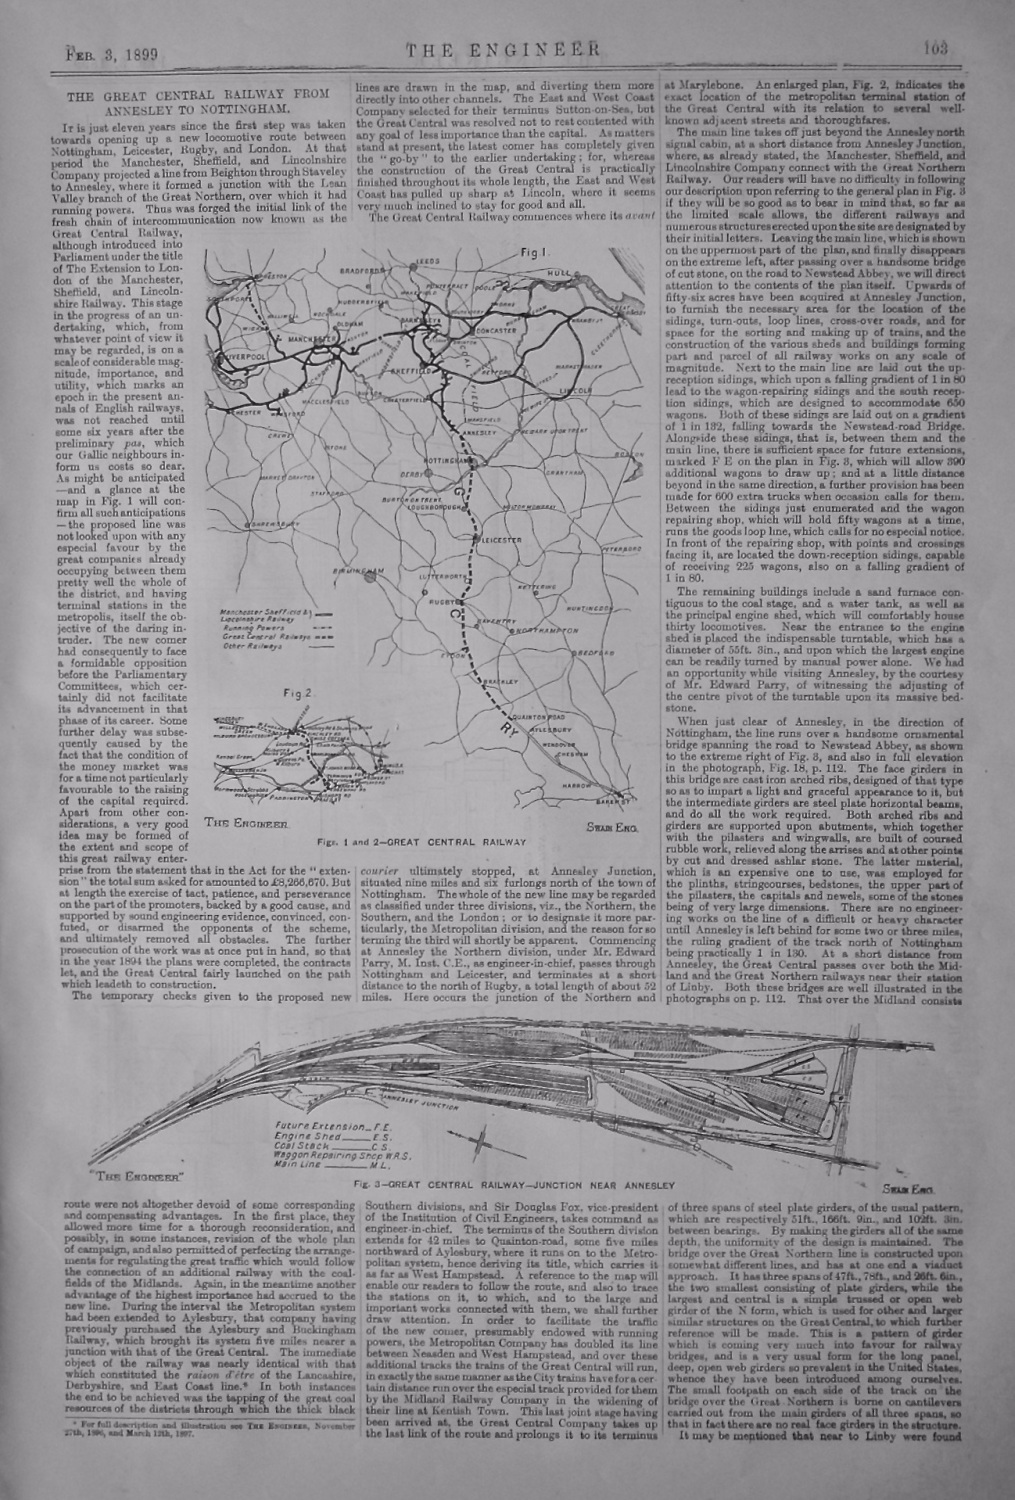 The Great Central Railway from Annesley to Nottingham. 1899.